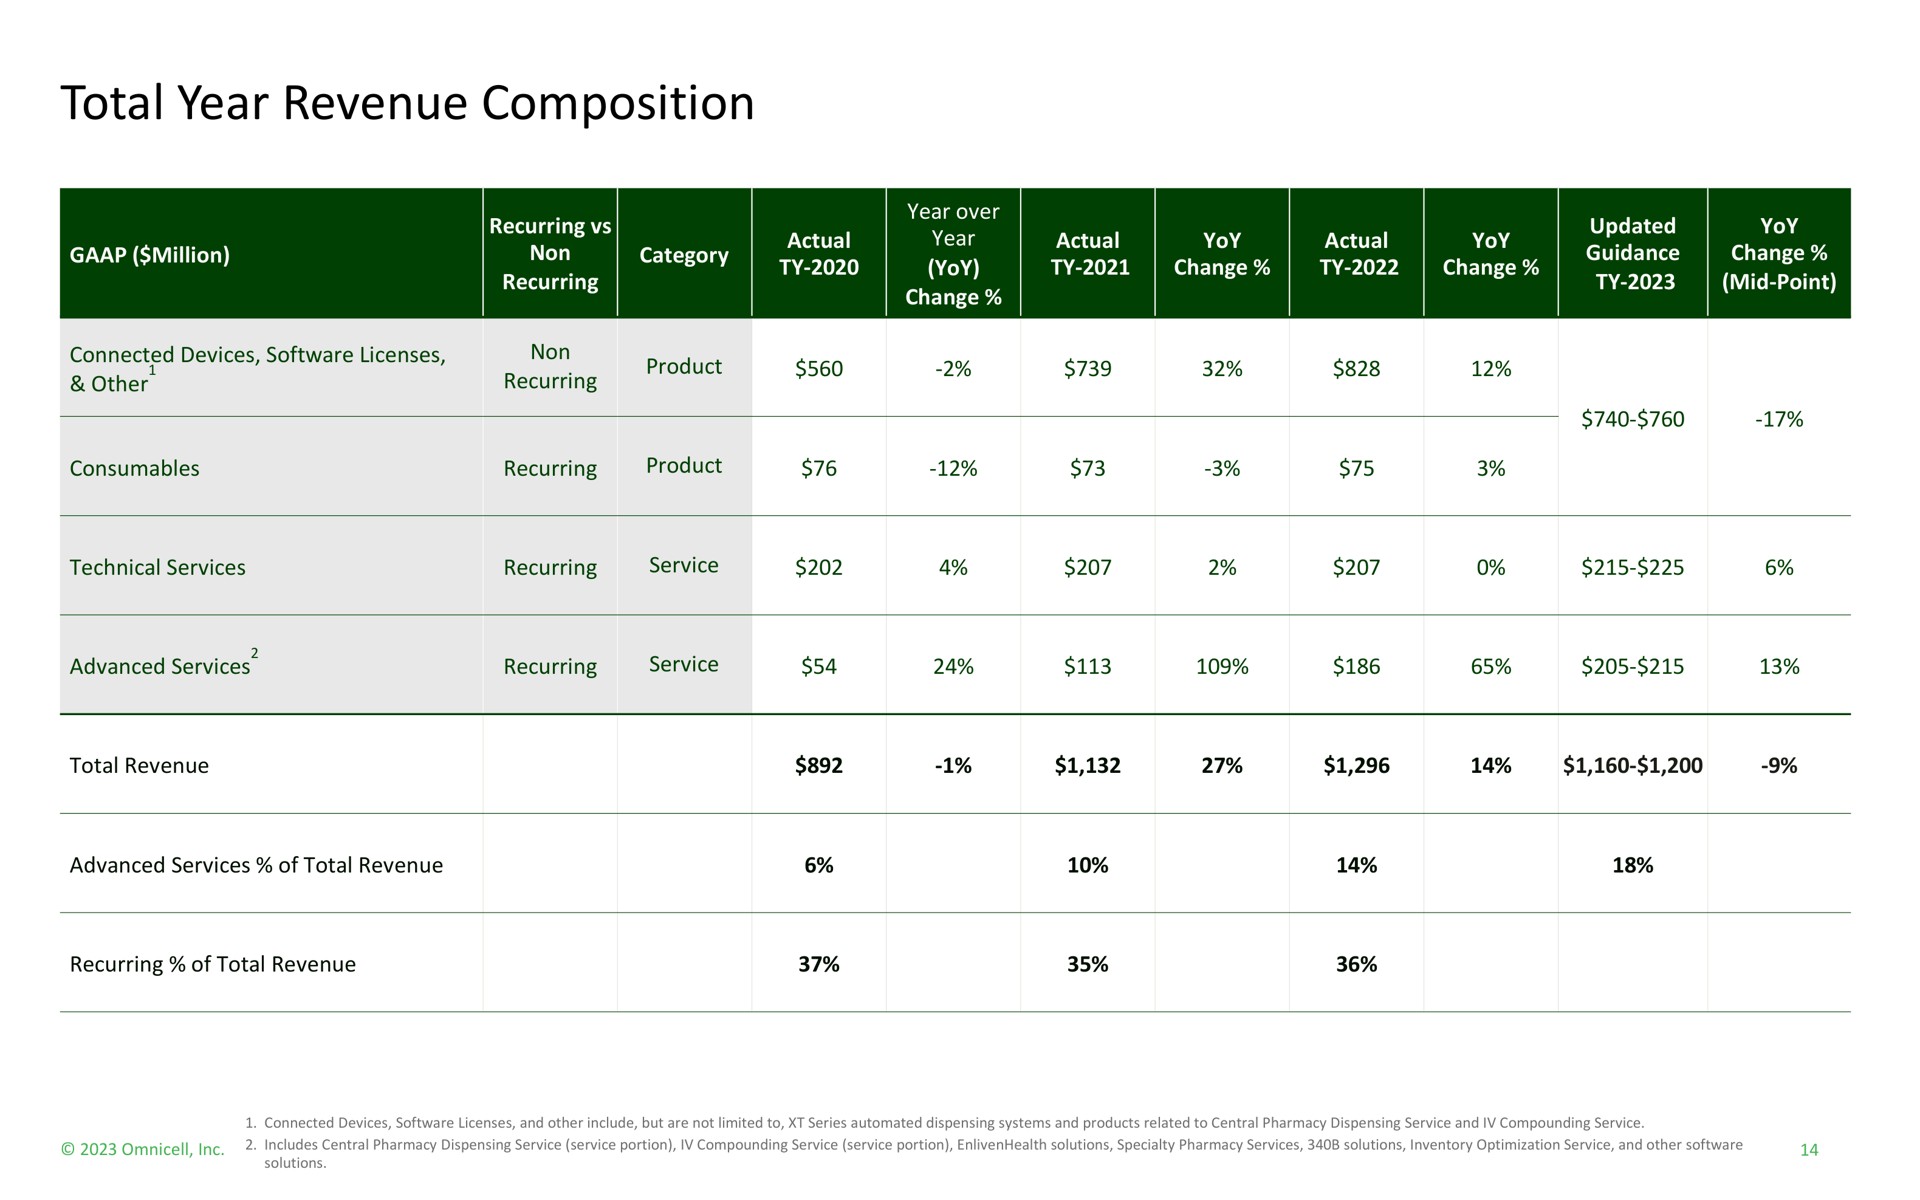 total year revenue composition mien yoy change change recurring product | Omnicell